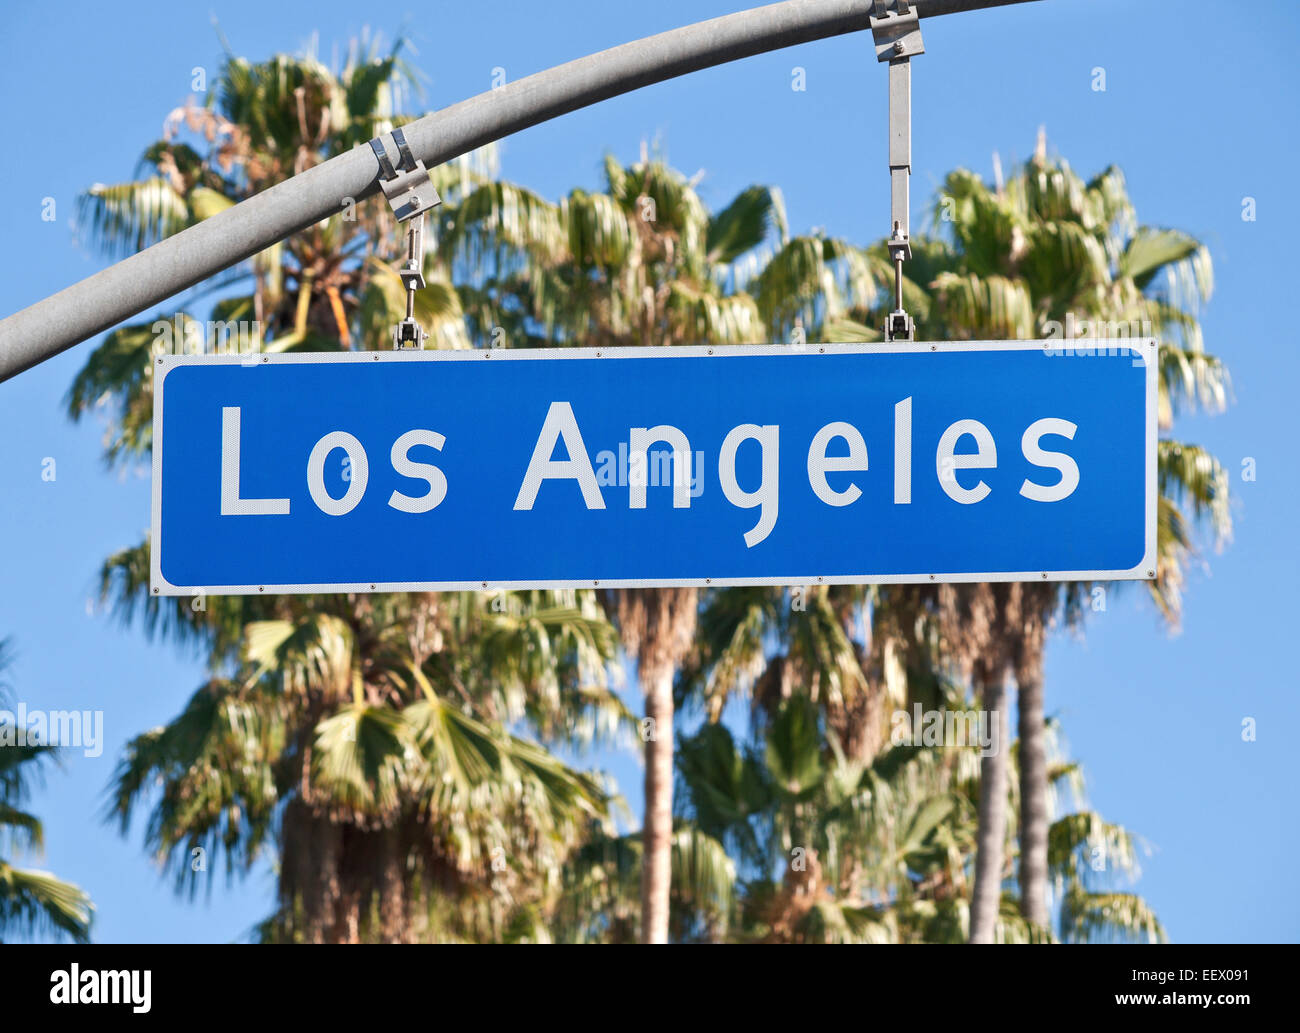 Los Angeles street sign in Southern California. Stock Photo